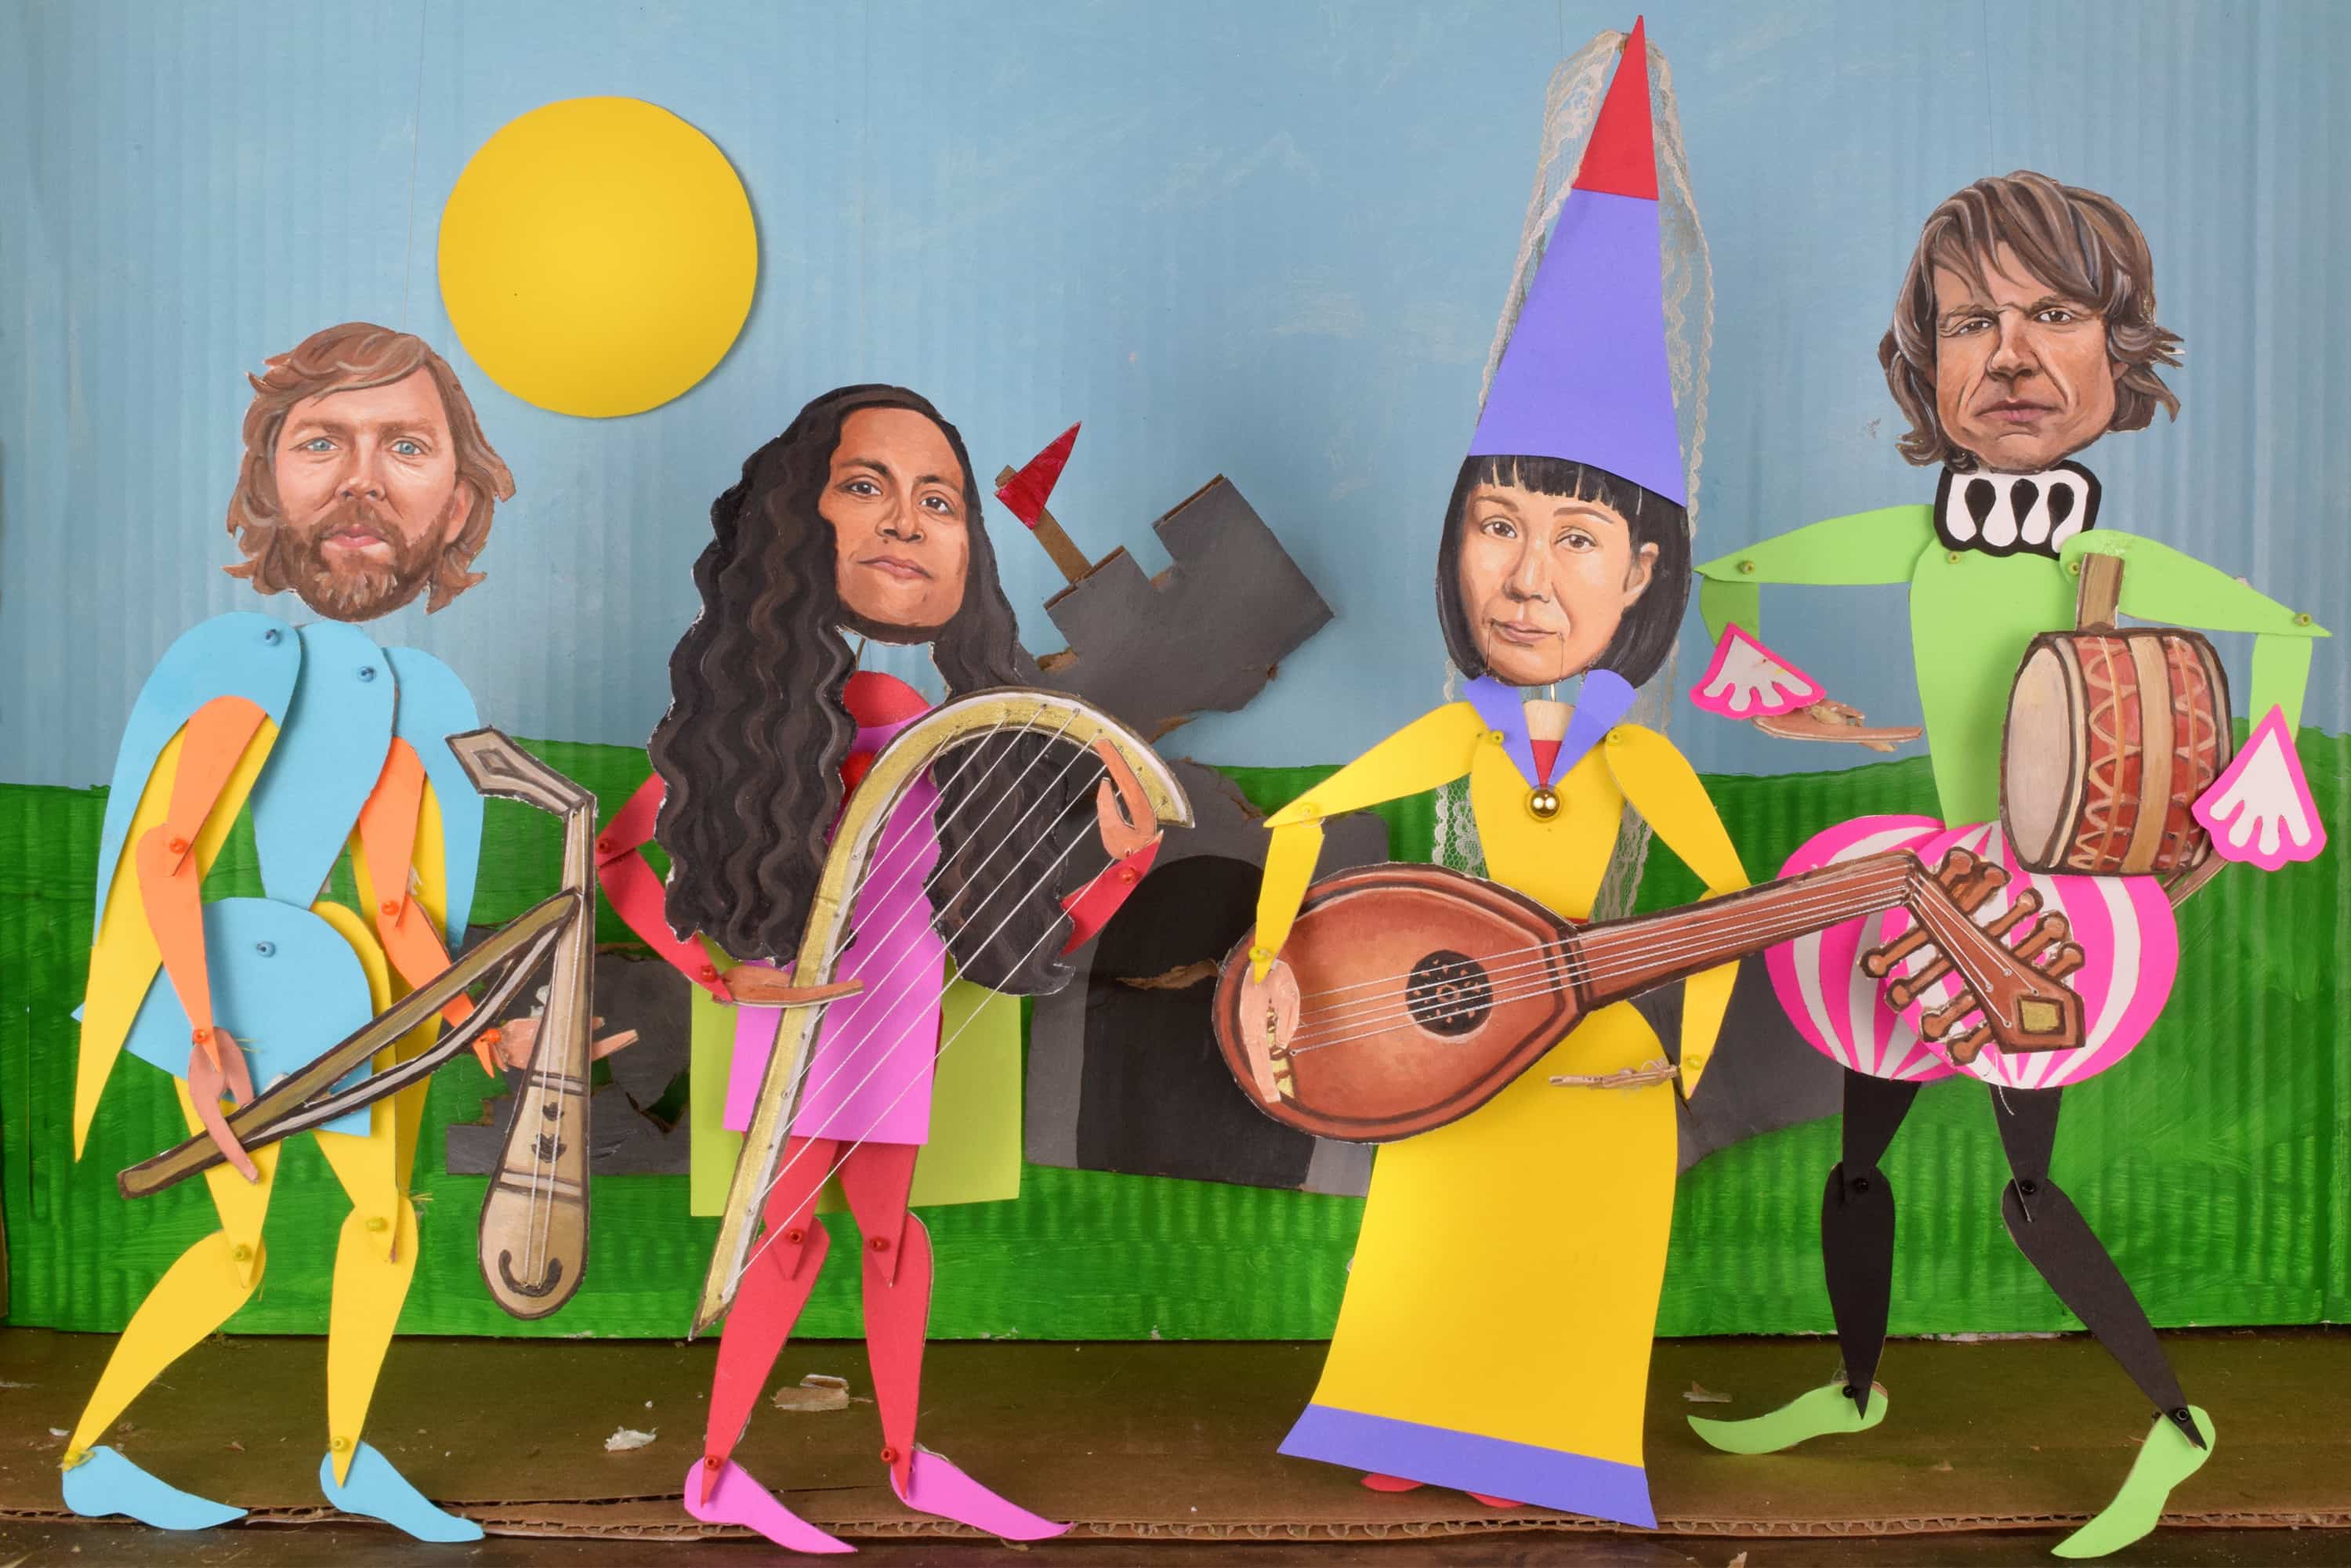 Deerhoof are traversing realms of creativity, transition and dystopia